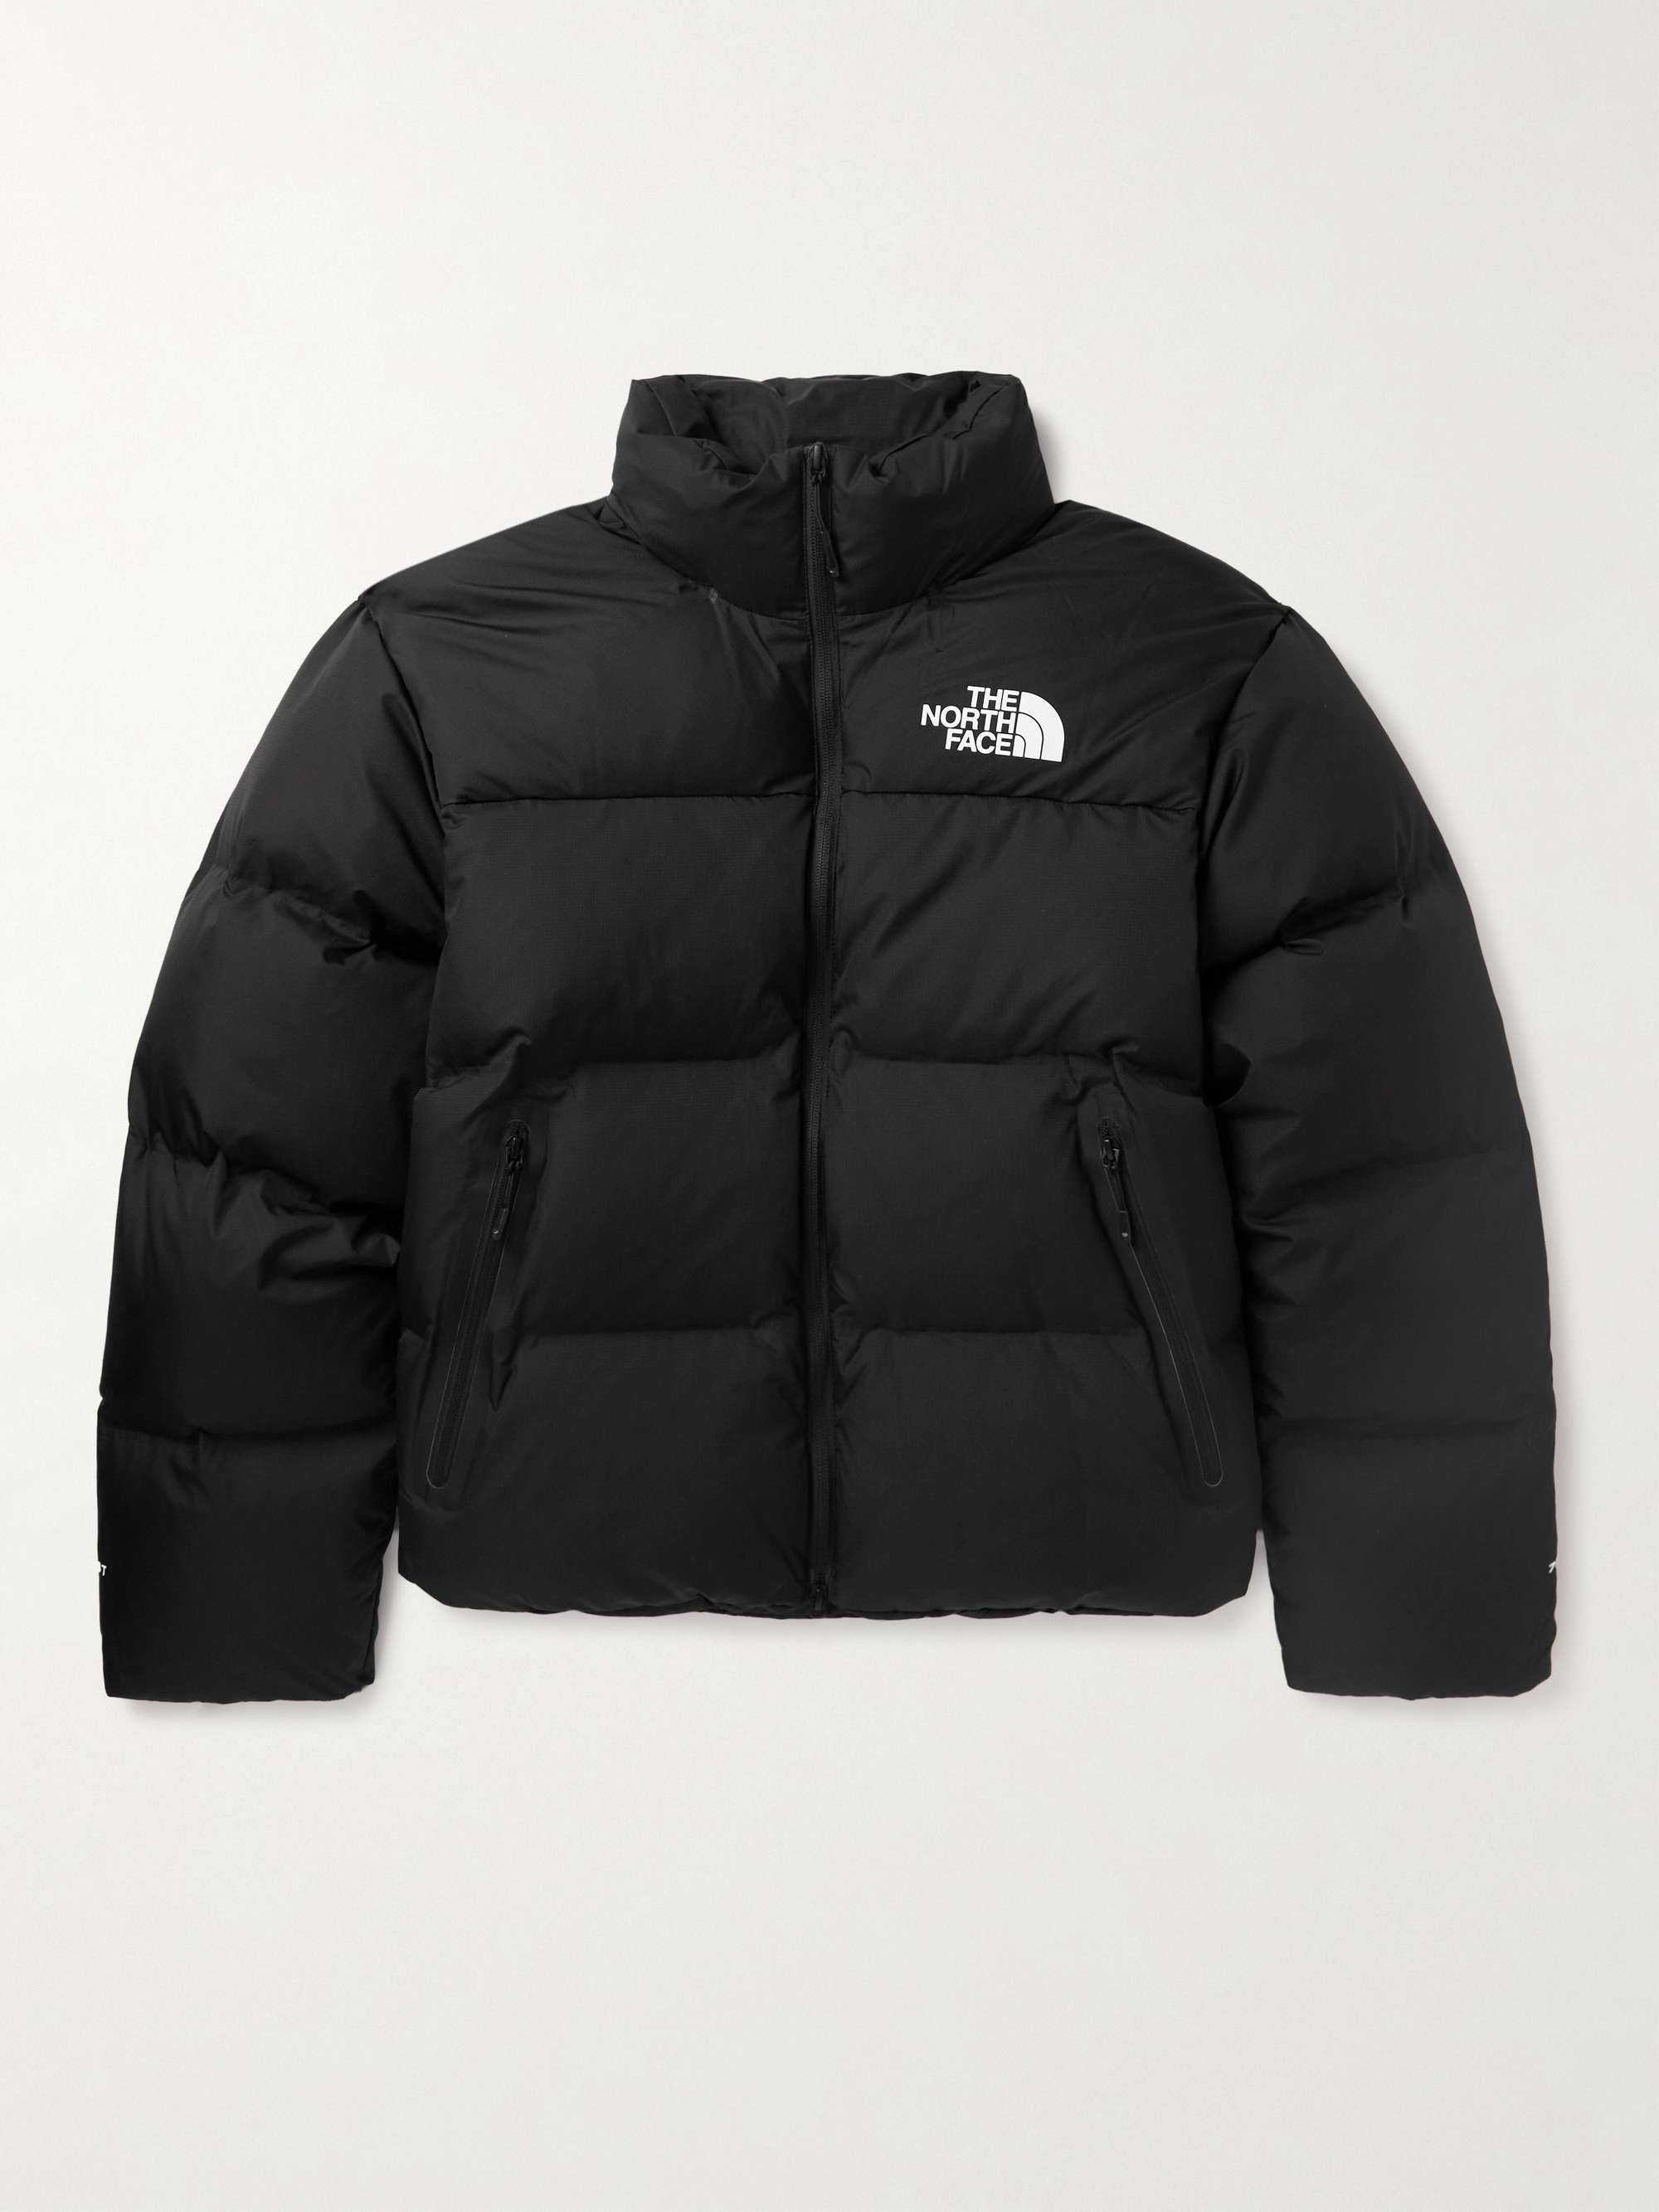 THE NORTH FACE Remastered Nuptse Quilted Shell Down Jacket | MR PORTER